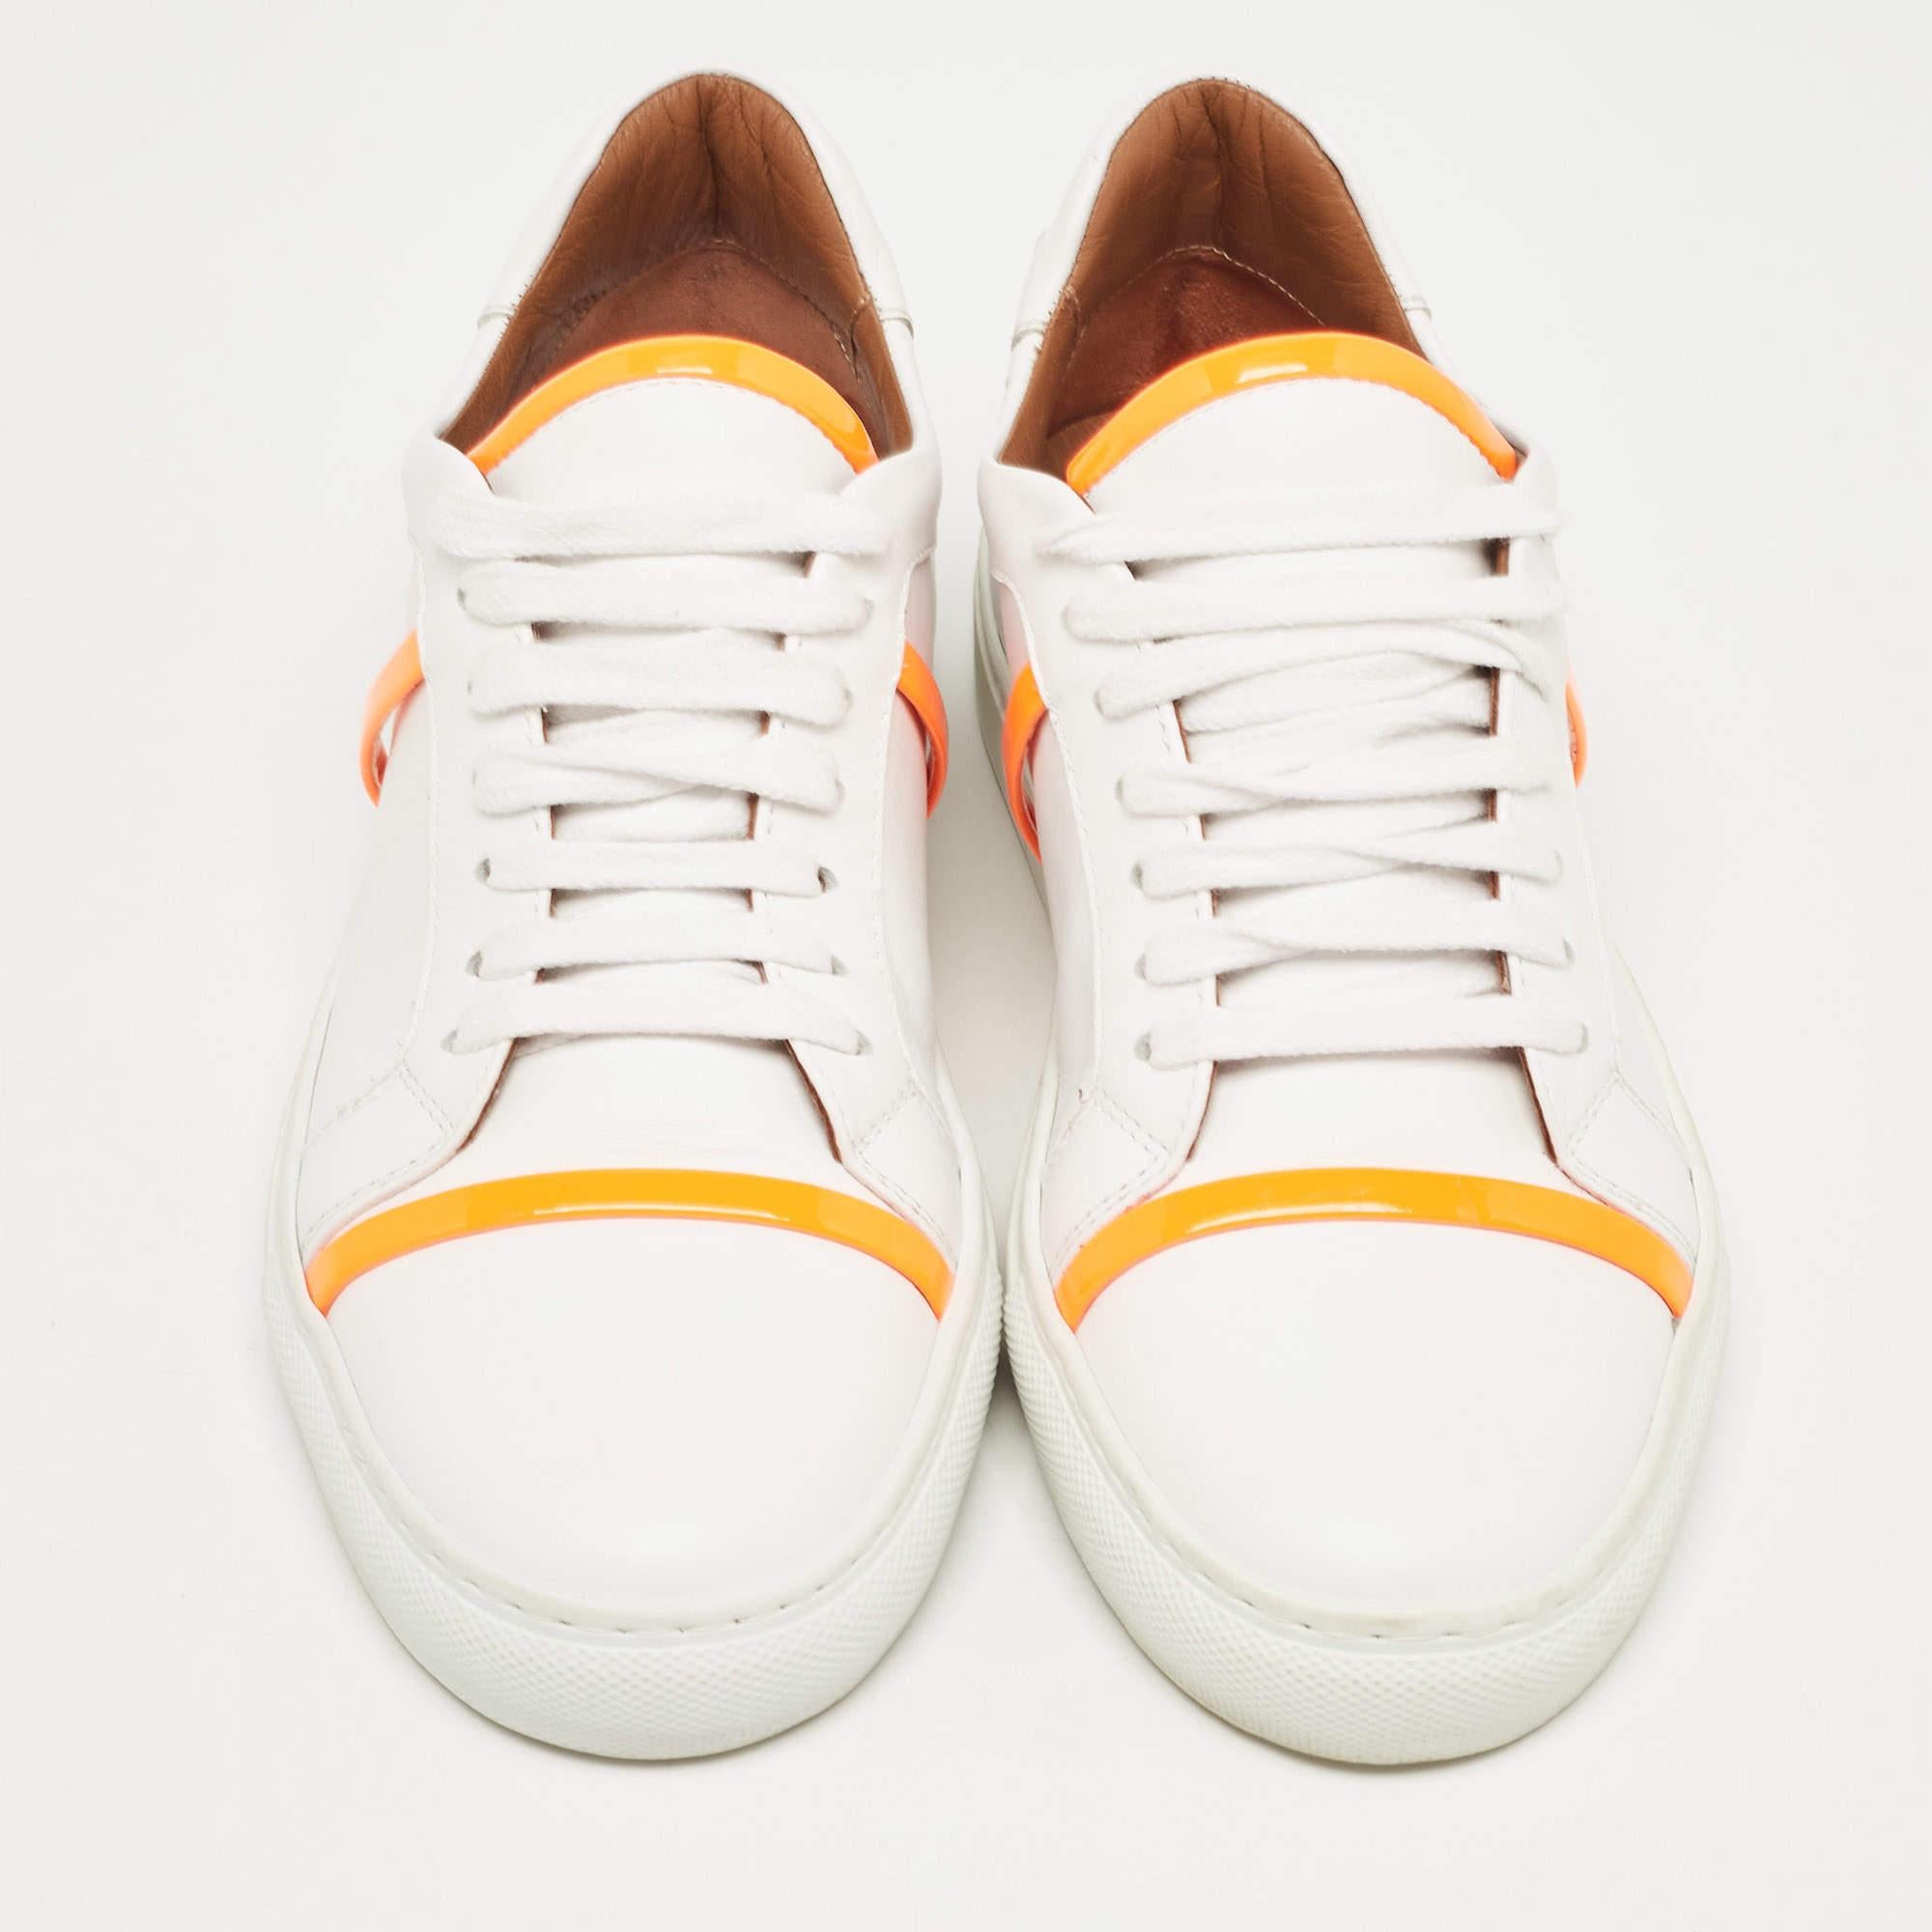 Malone Souliers White/Neon Orange Leather and Patent Deon Sneakers Size 37 For Sale 3